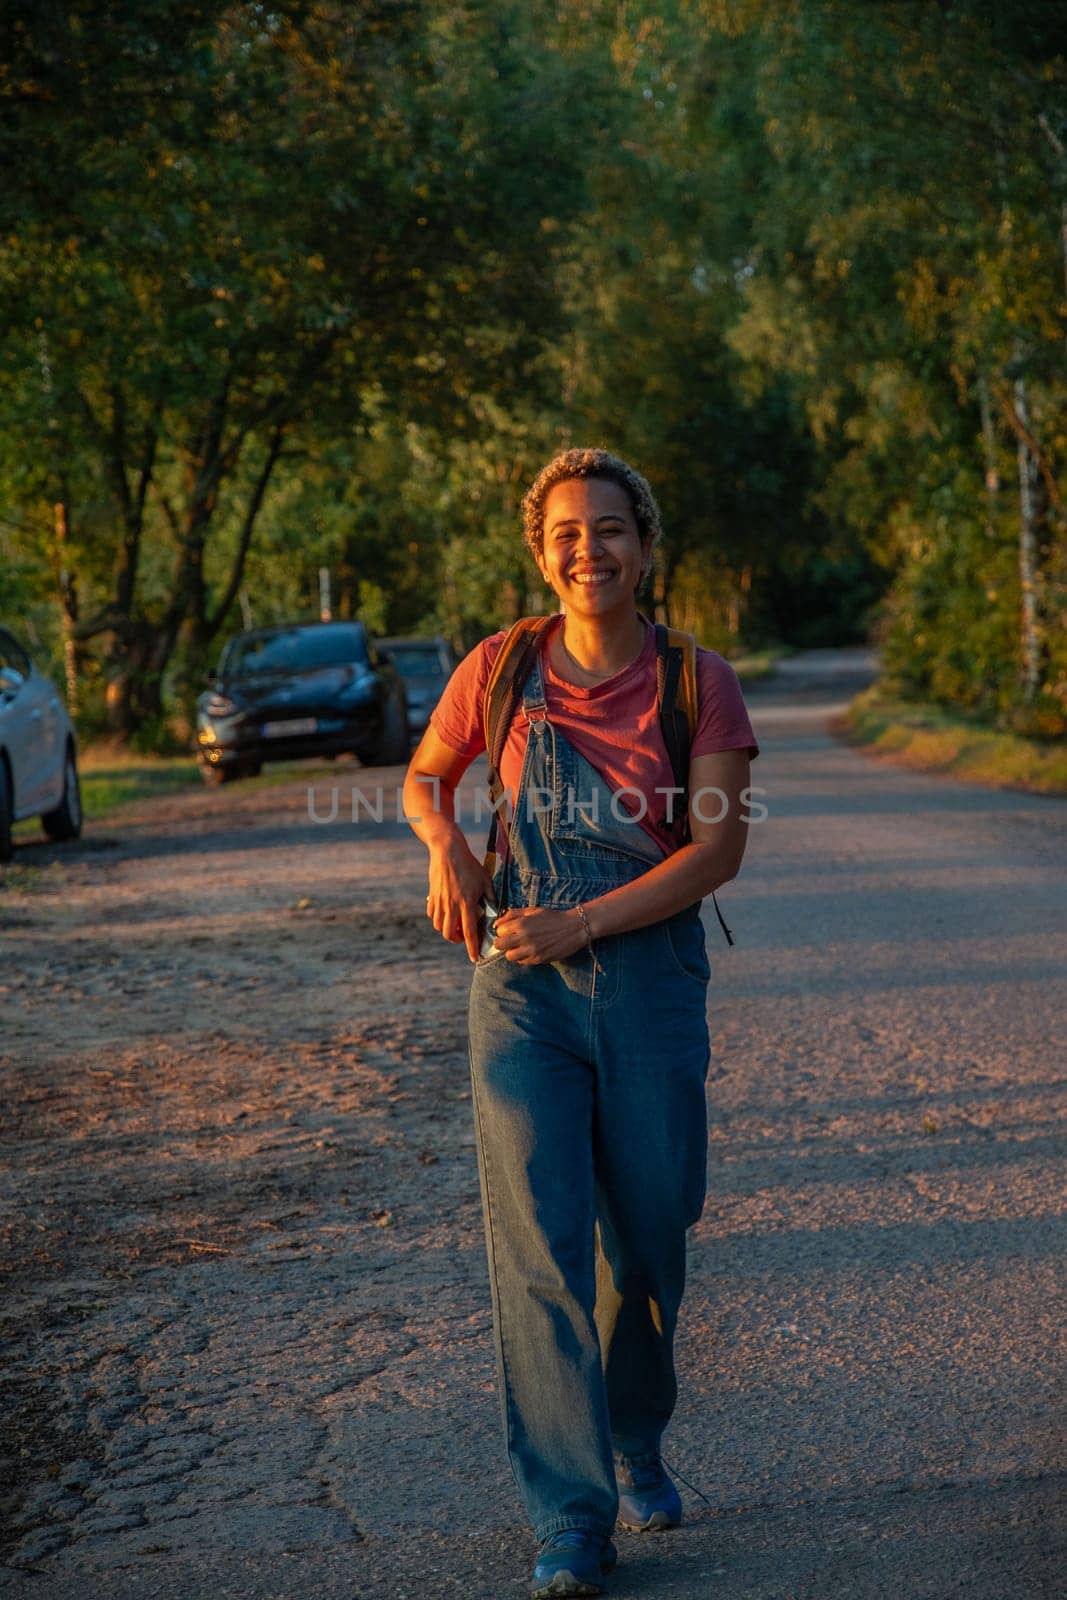 A young Brazilian woman in denim overalls walks along a forest road, the girl smiles happily, a car in the backgraund by KaterinaDalemans